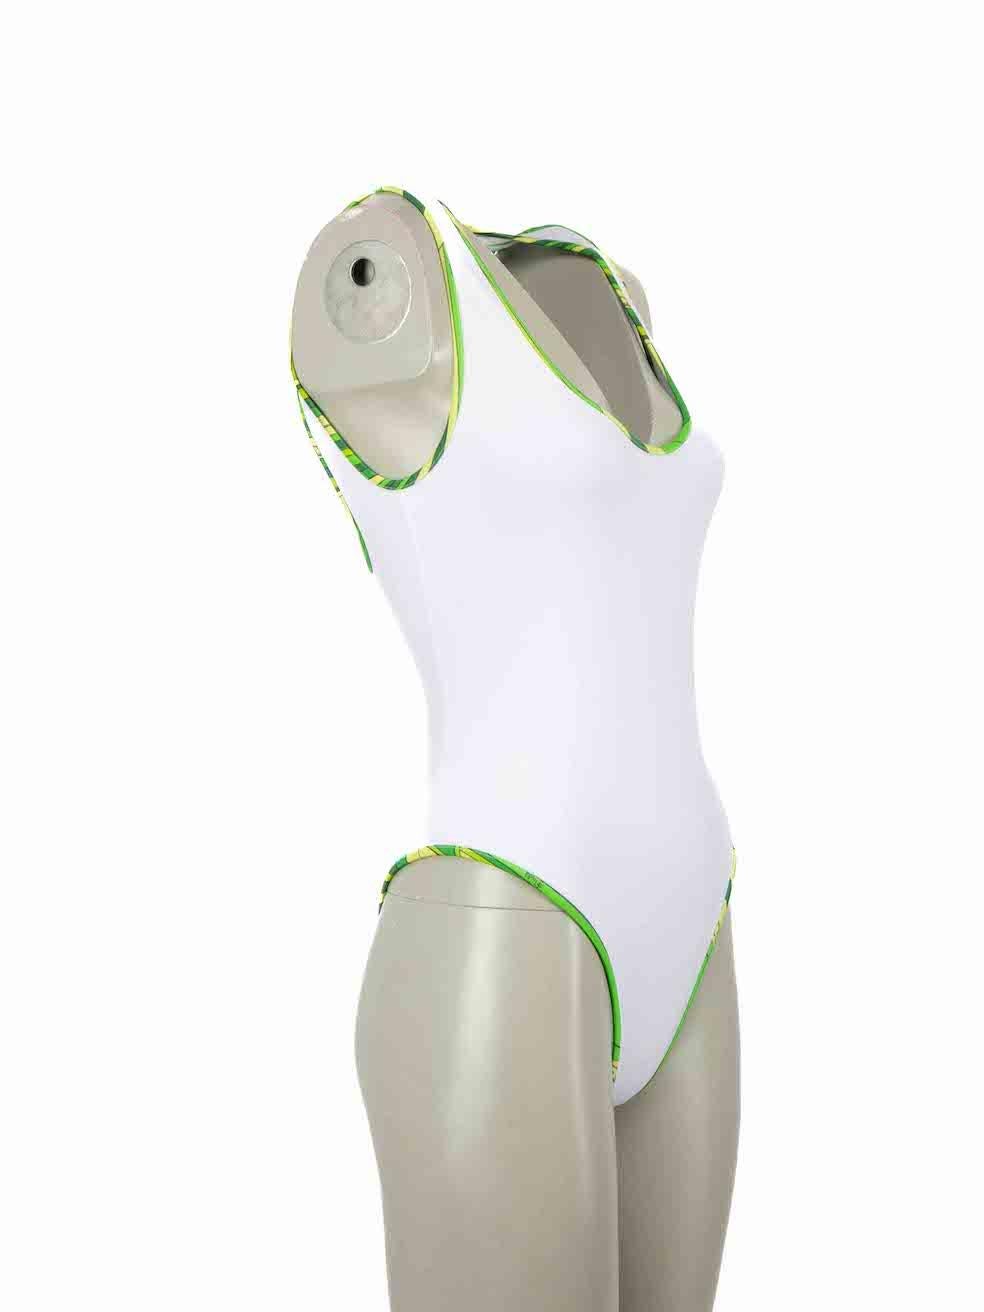 CONDITION is Never worn, with tags. No visible wear to swimsuit is evident, chipping to clasp due to poor storage can be seen on this new Emilio Pucci designer resale item.
 
Details
White
Synthetic
Swimsuit
Green patterned trim
Back neck clasp